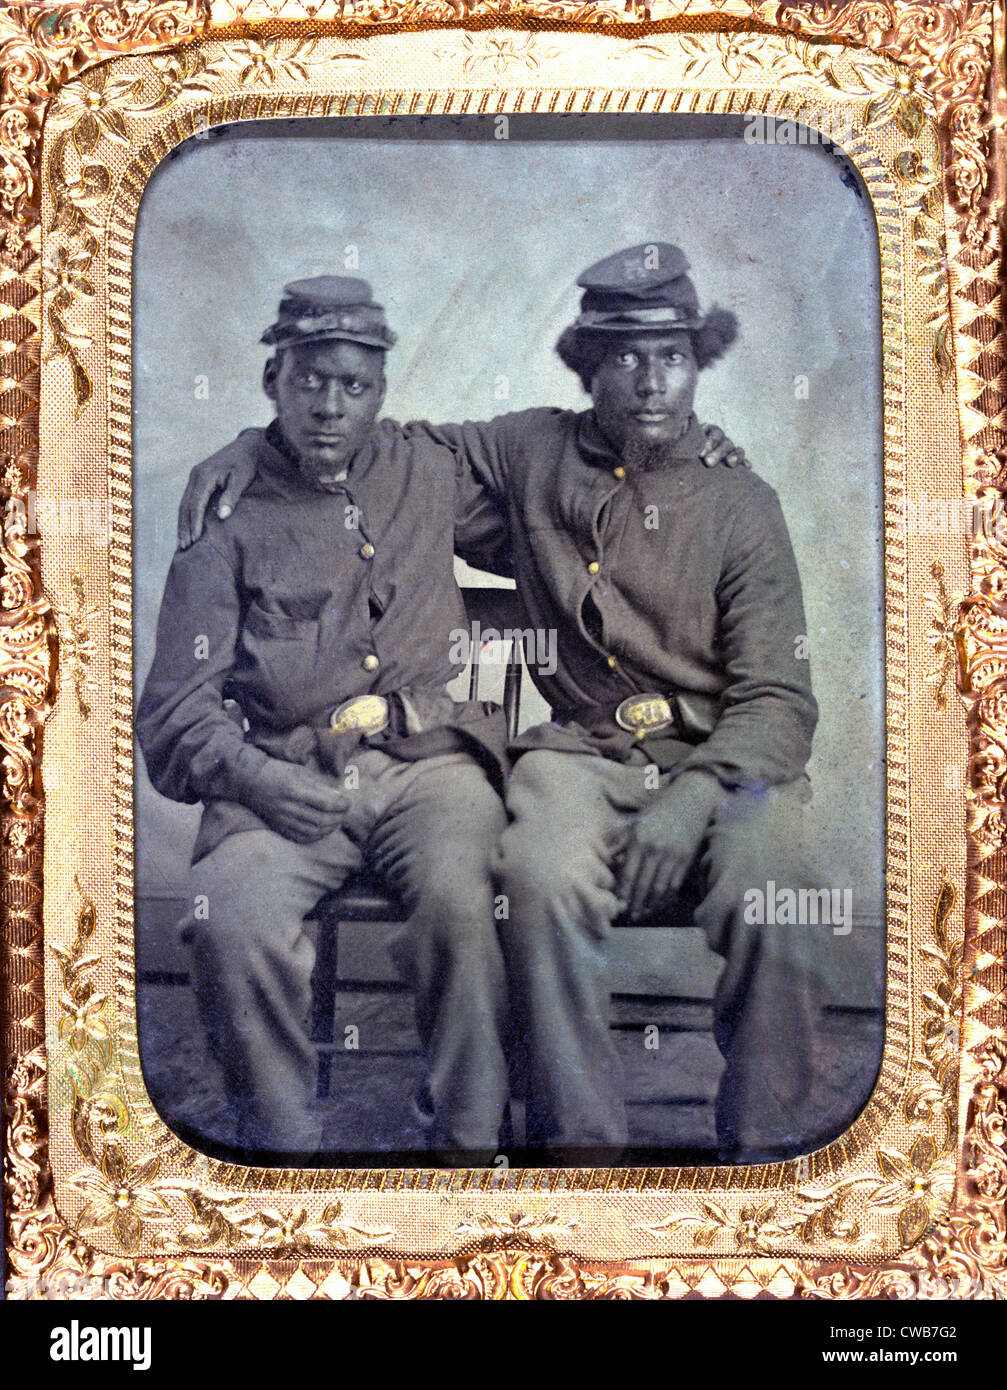 Two African American soldiers wearing Union uniforms. Tintype ca. 1860-1870 Stock Photo